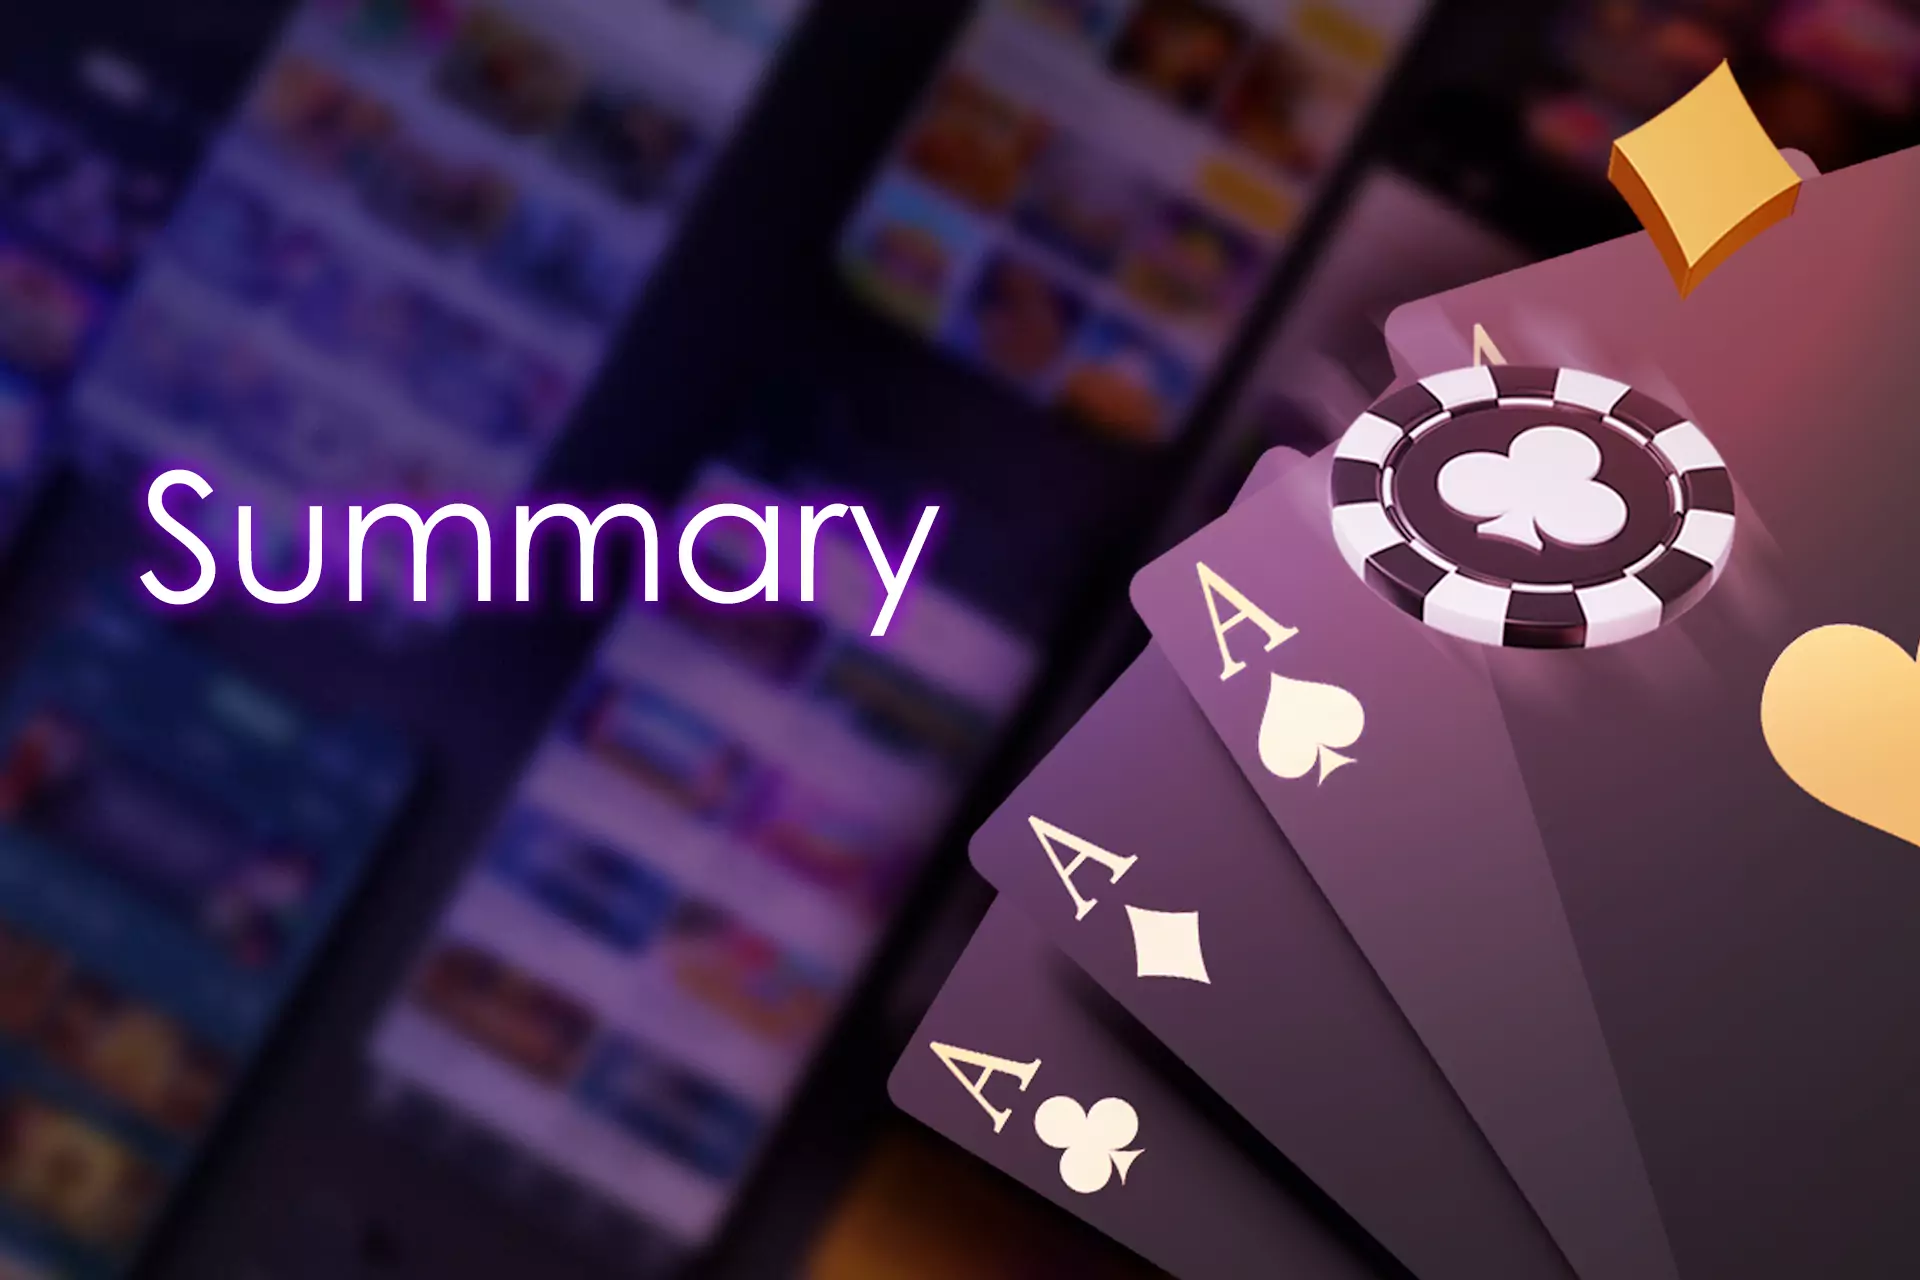 Playing casino games in the app might become a new useful experiment but we highly recommend choosing an app carefully.